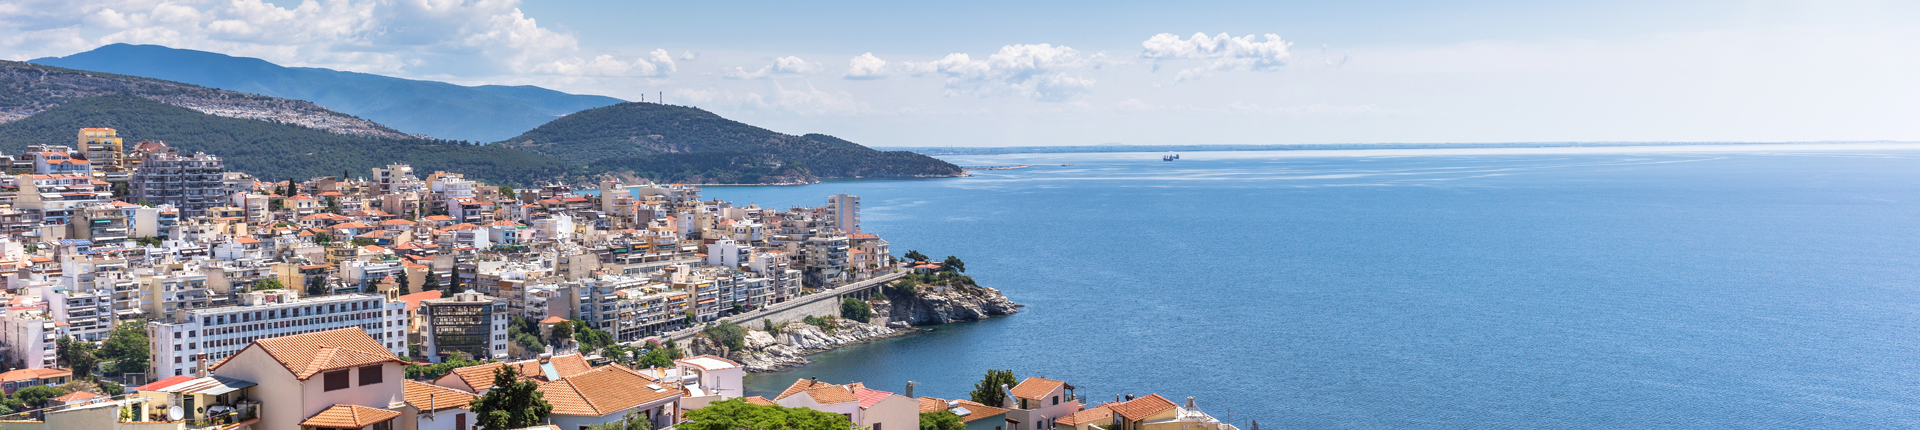 Panoramic view of Kavala city from the castle